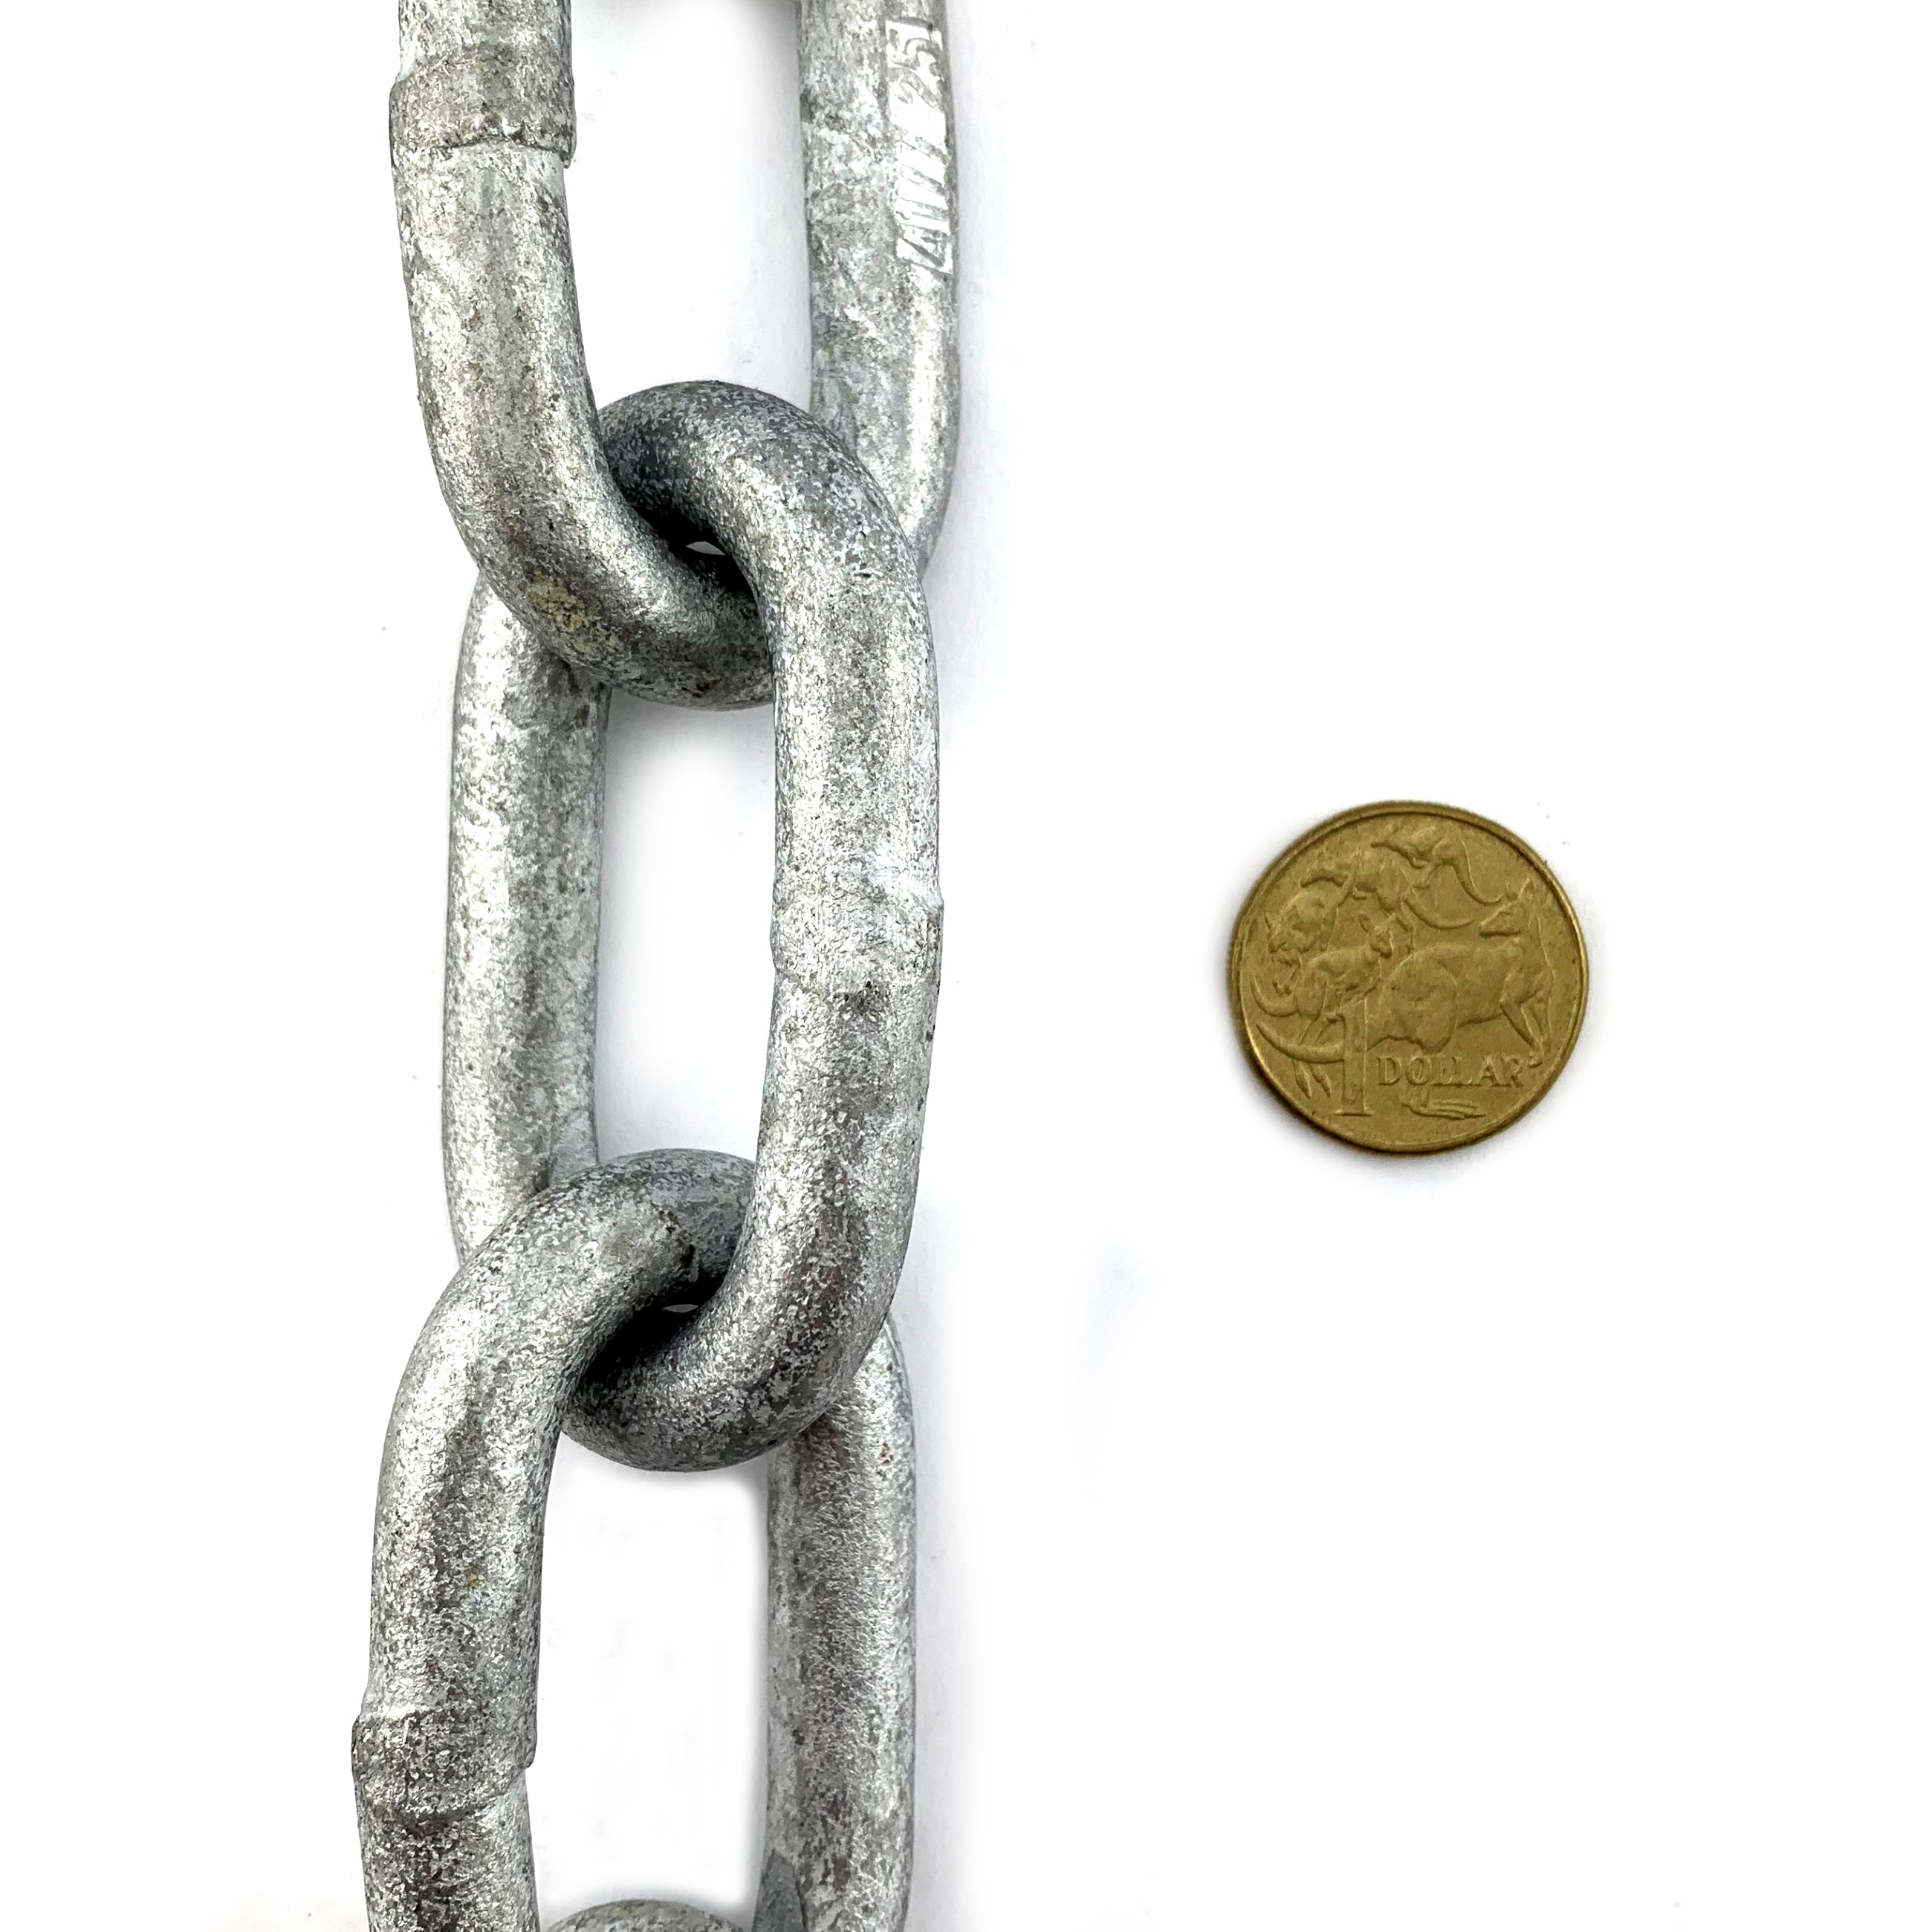 AS Galvanised Trailer Chain 10mm. Order By The Metre with delivery Australia wide